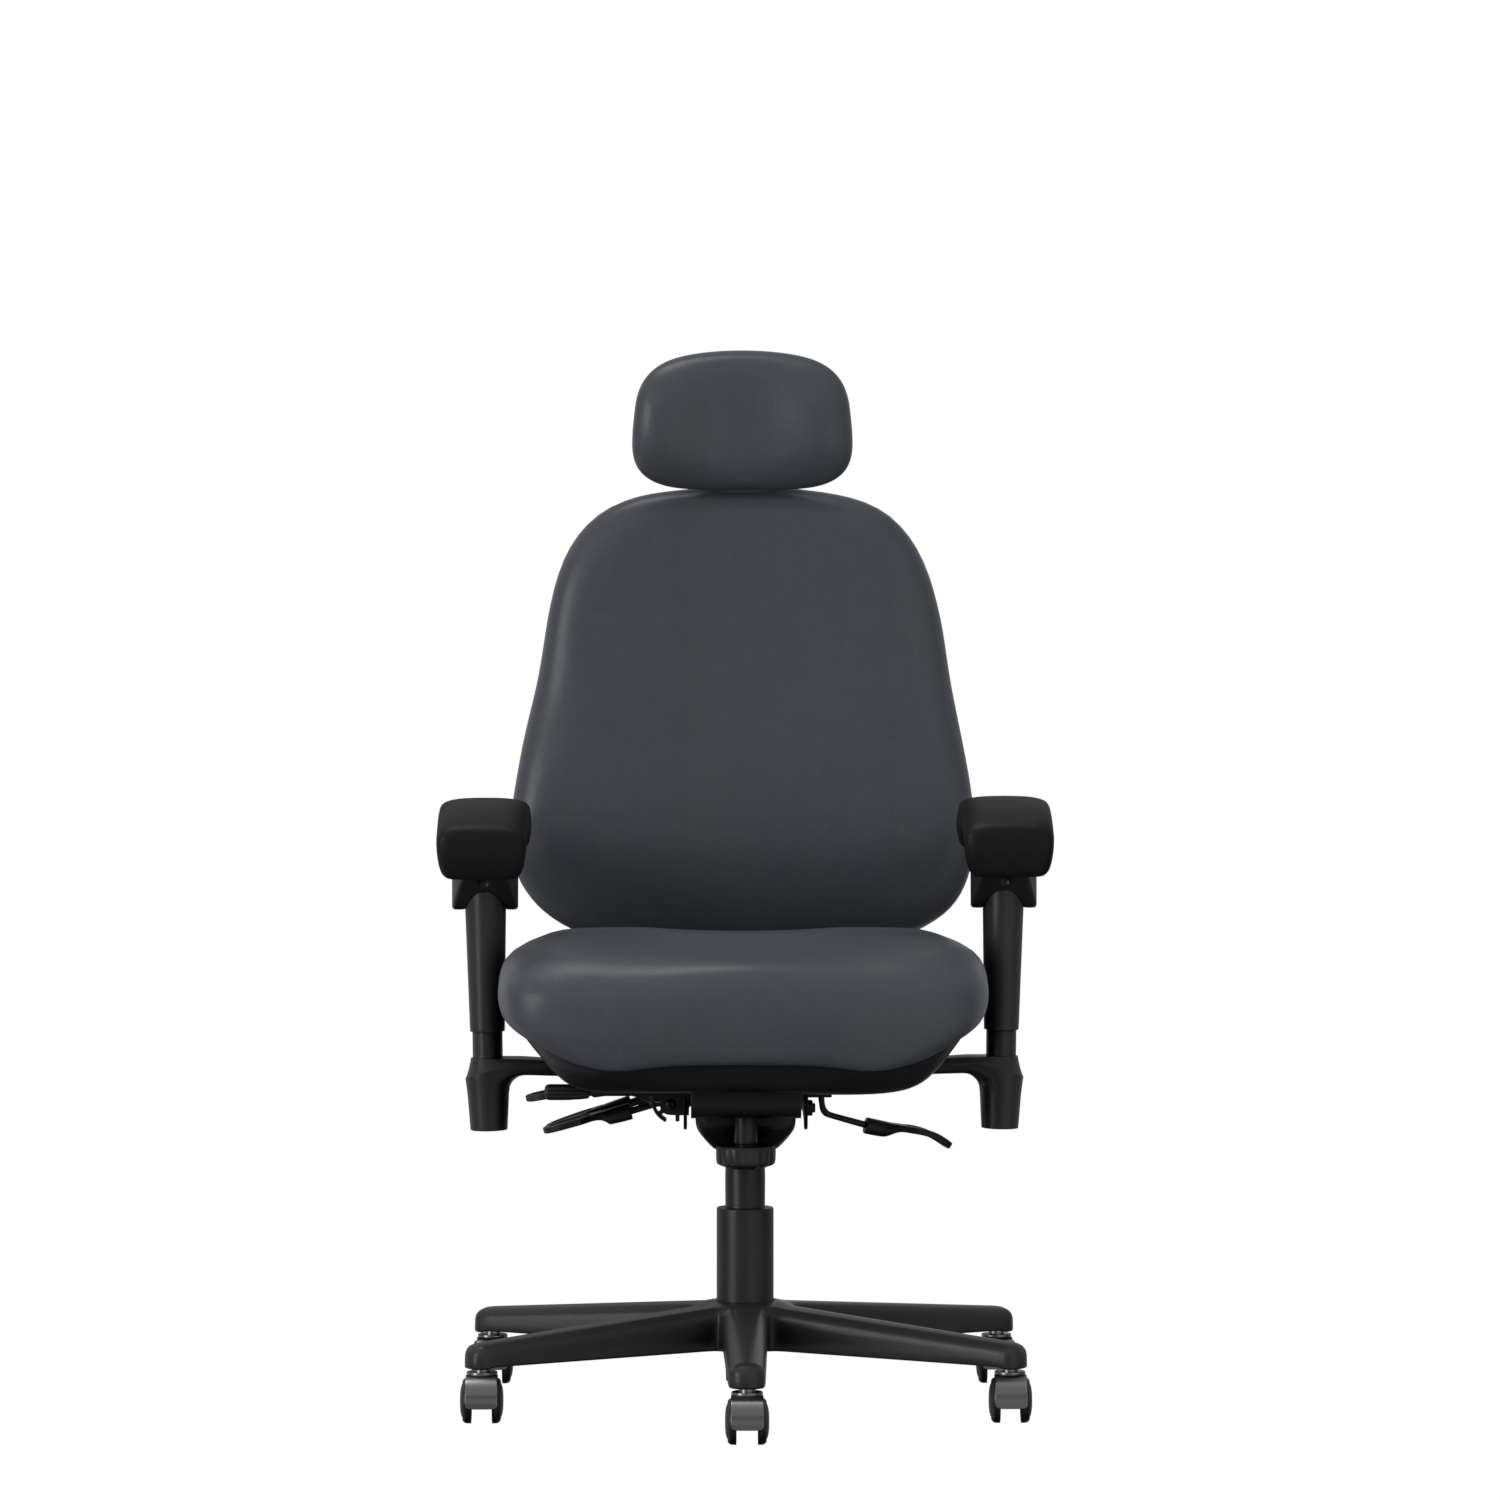 NEXT24 3500 – Intensive Use Series Chair